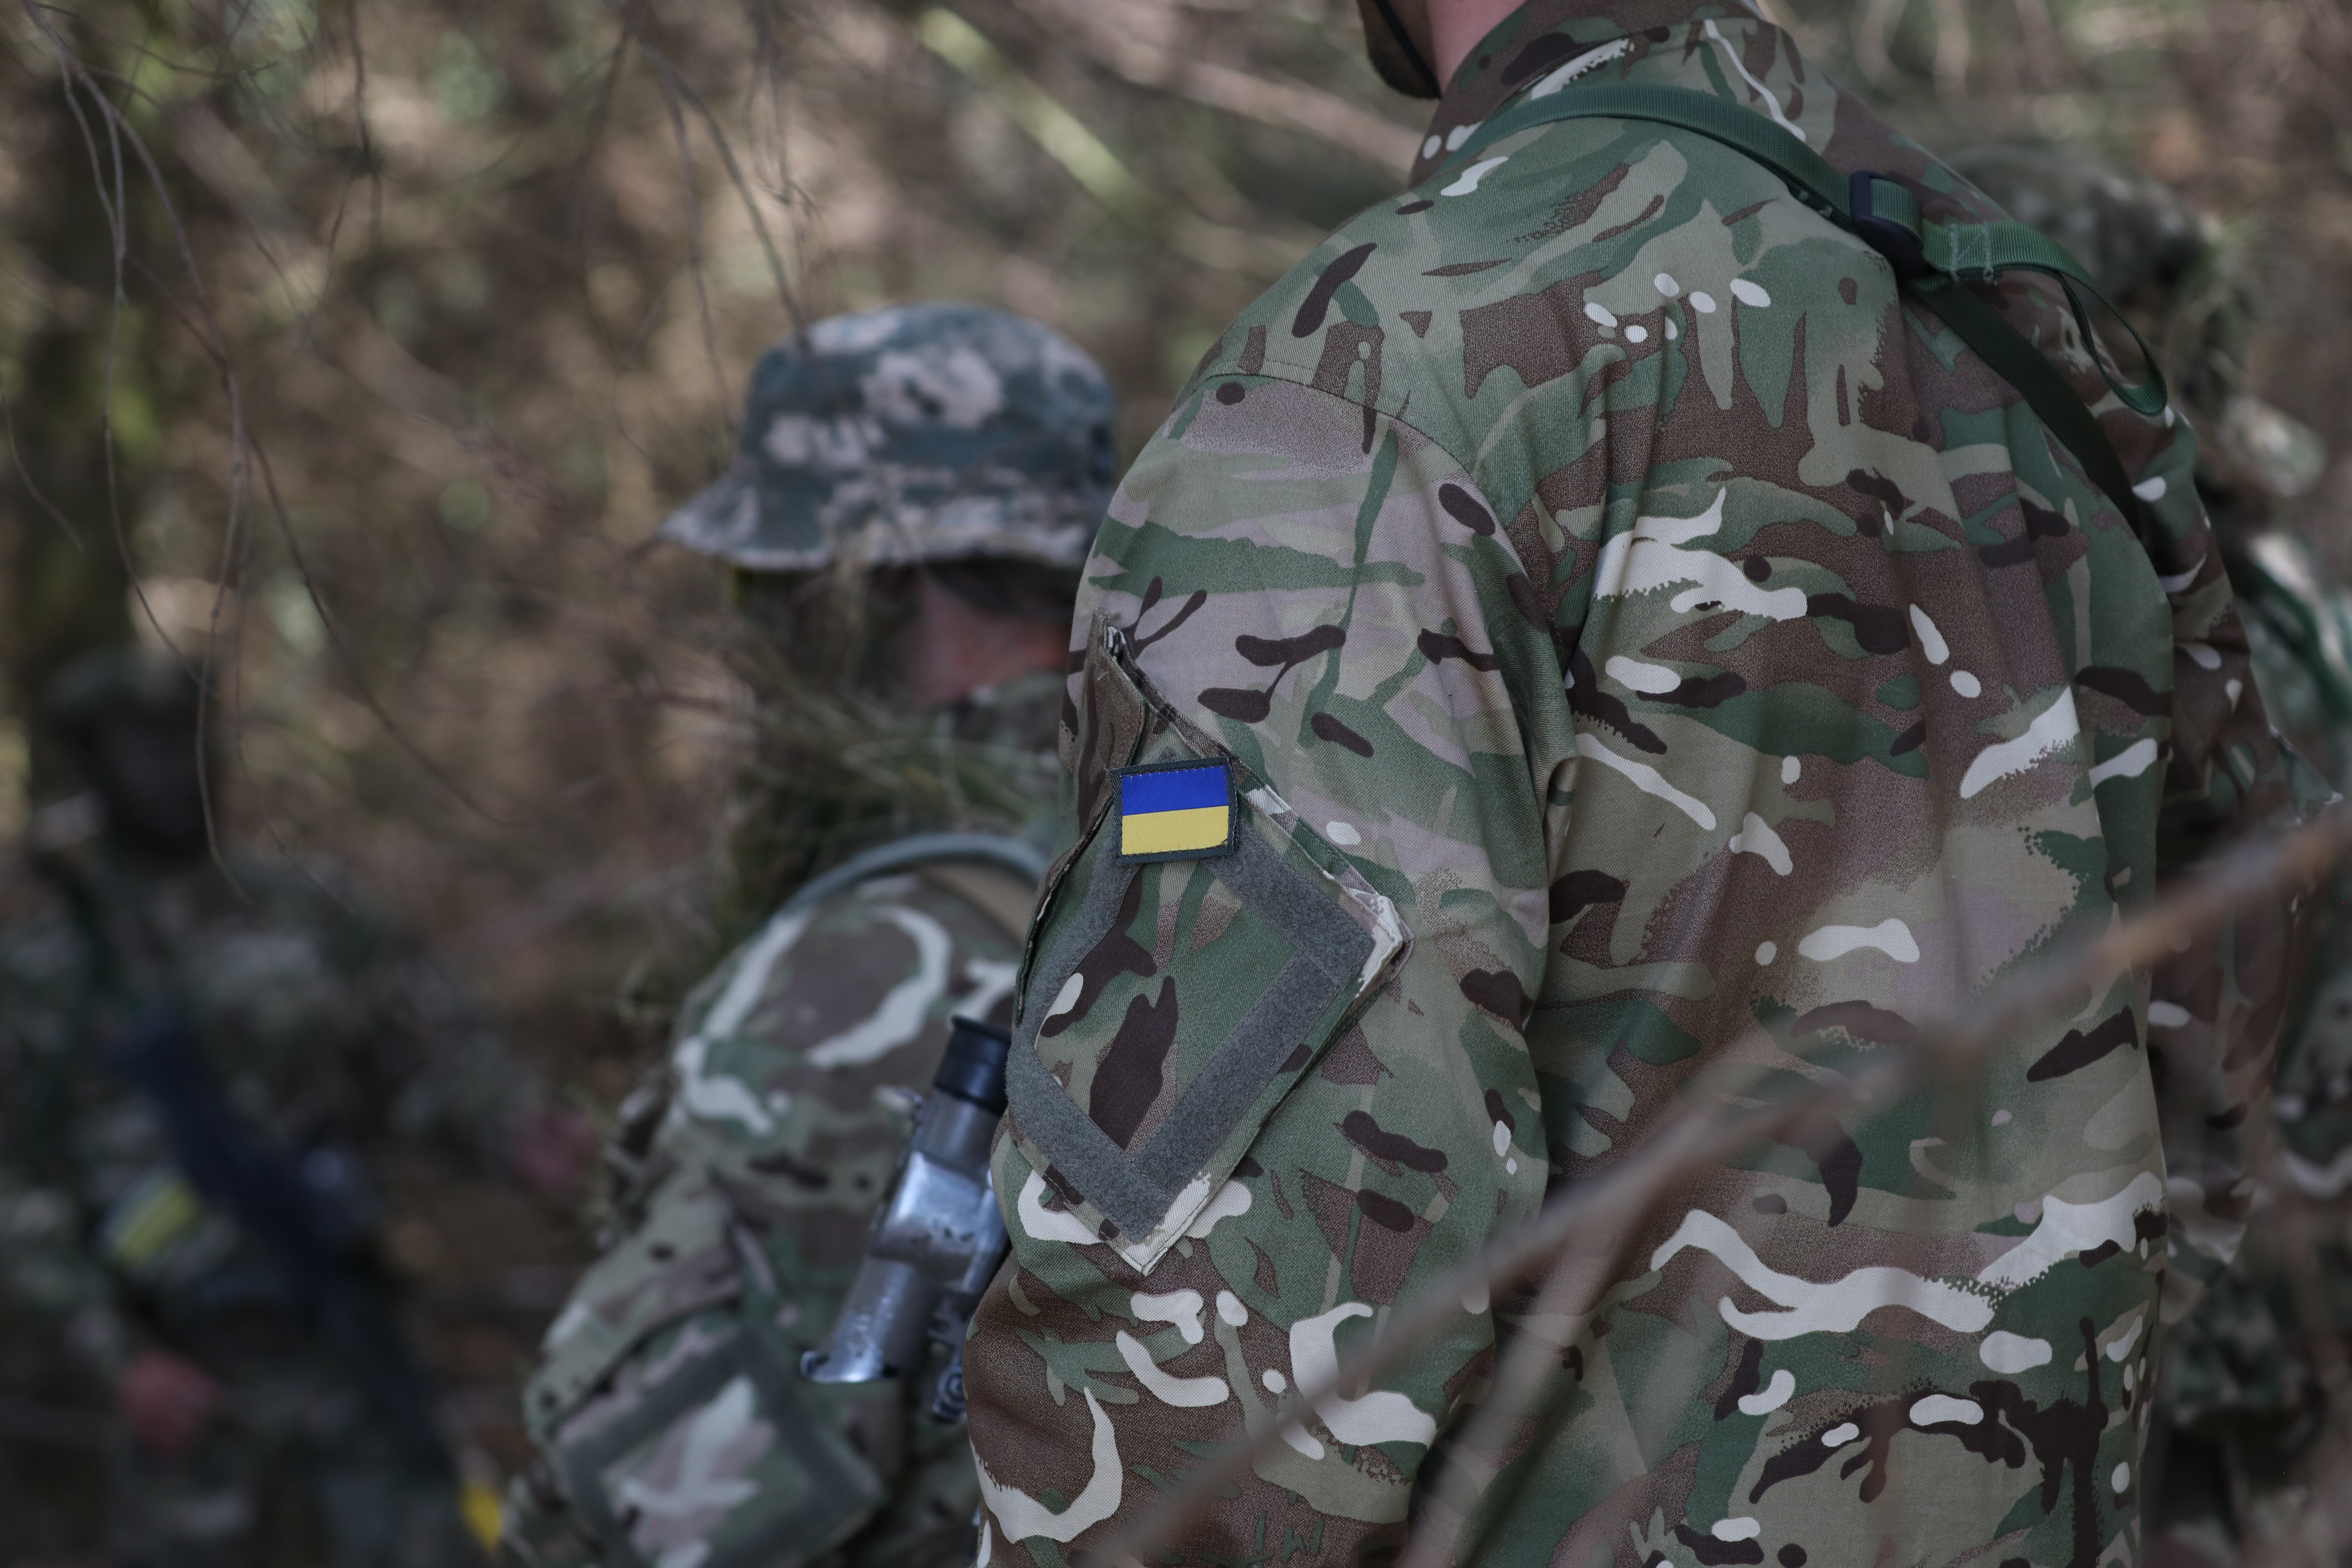 Image shows Ukrainian soldiers in camouflage uniform.